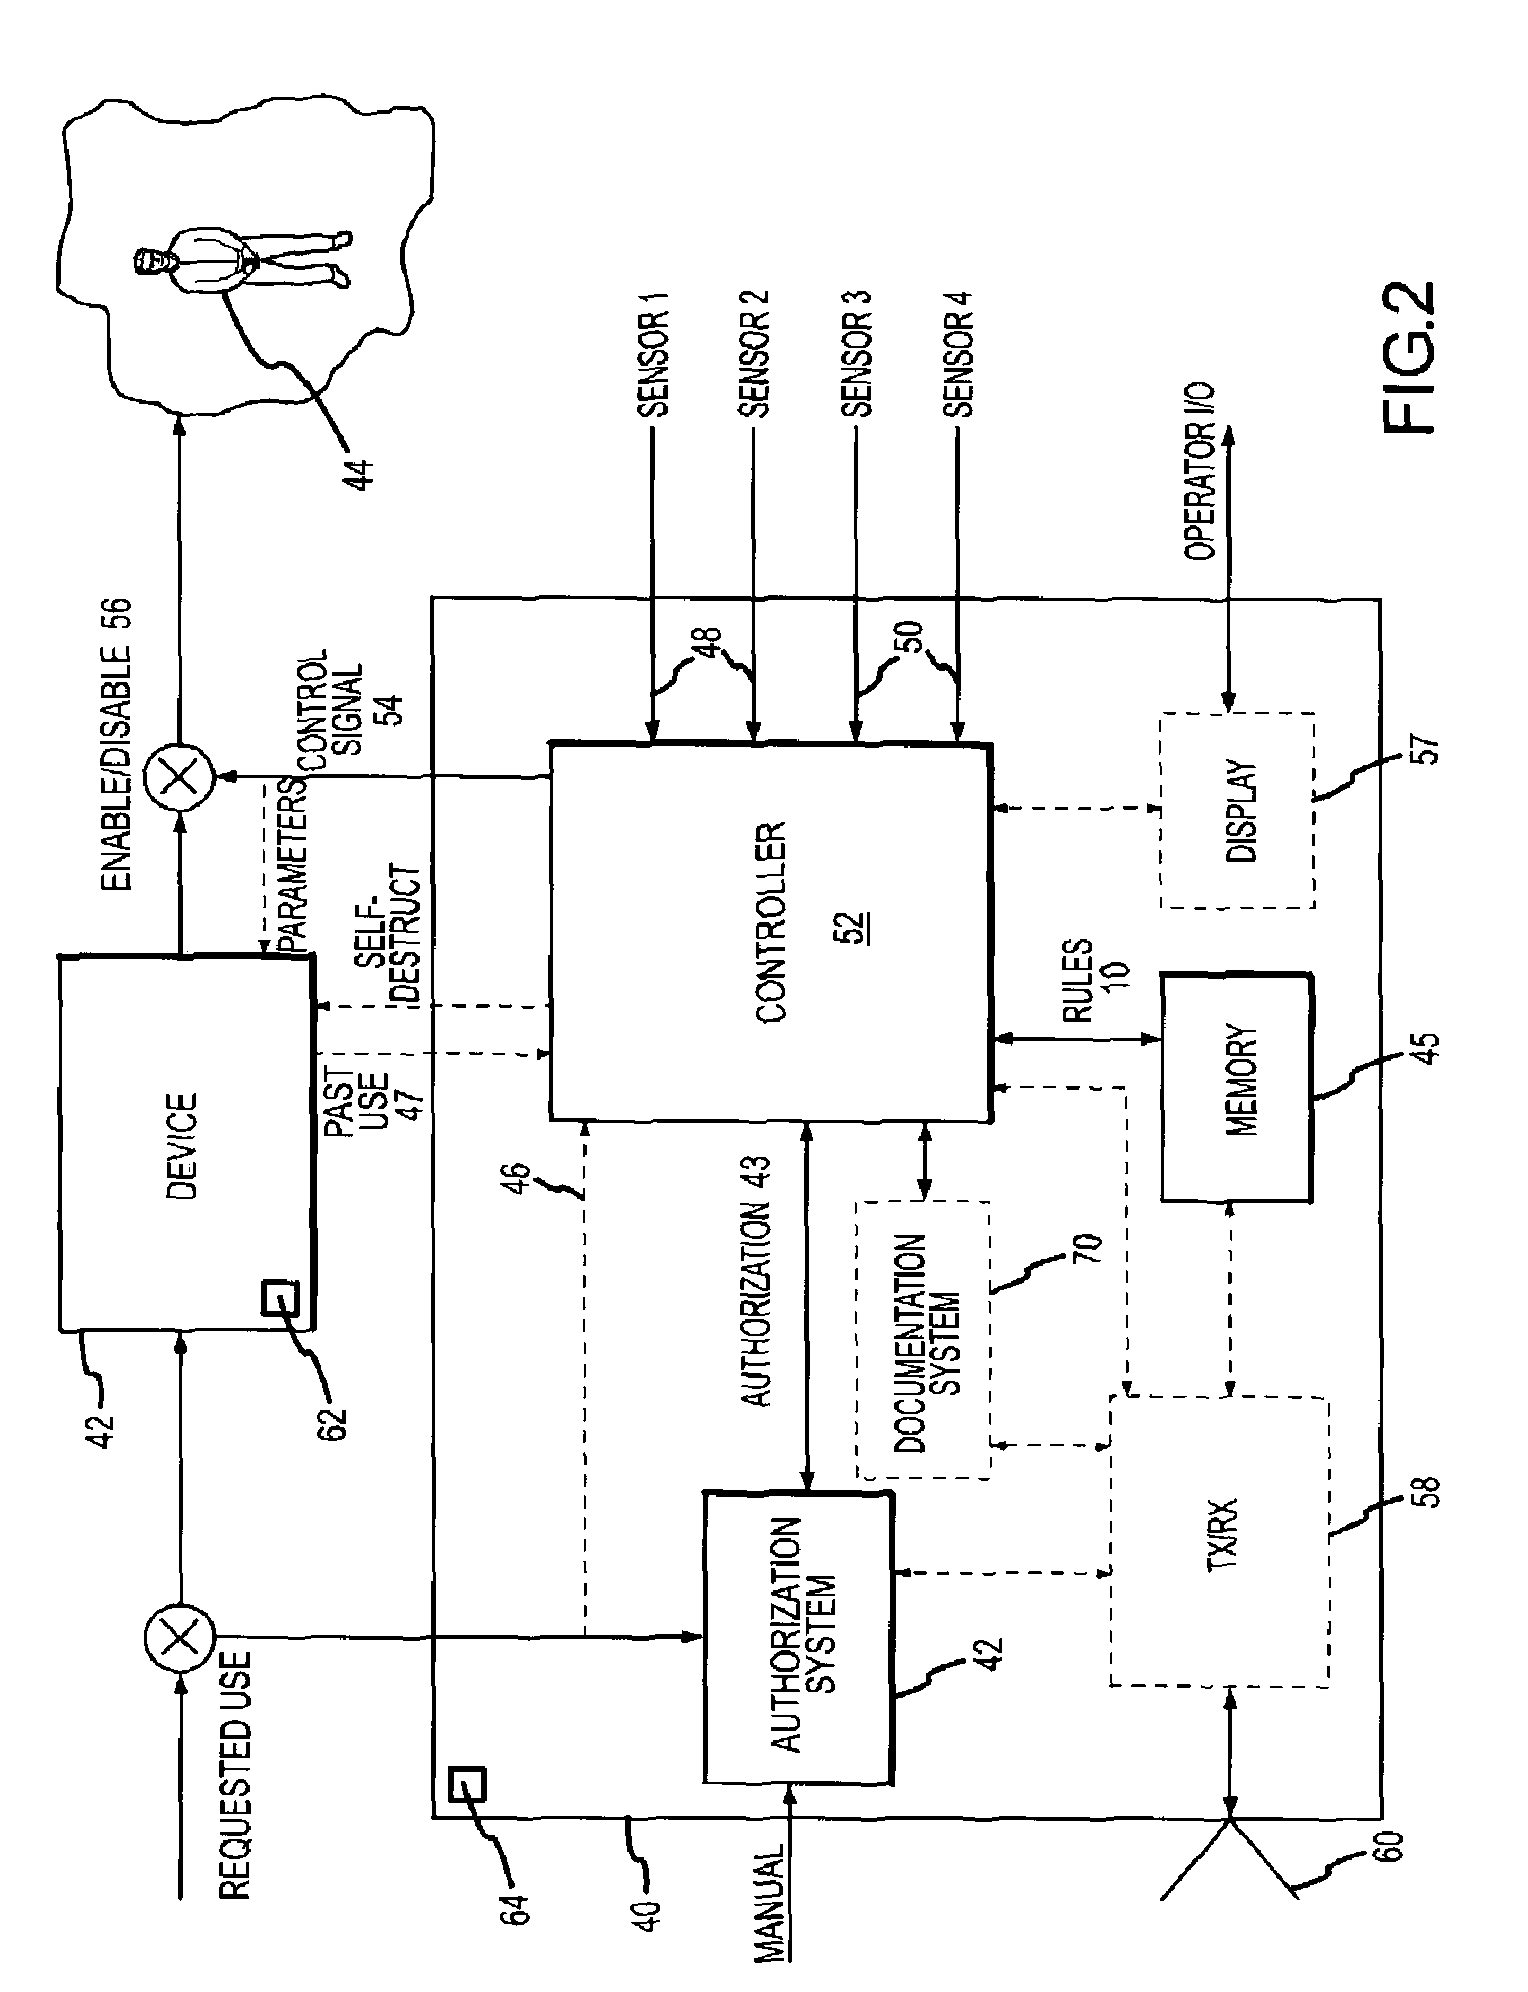 Safeguard system for ensuring device operation in conformance with governing laws